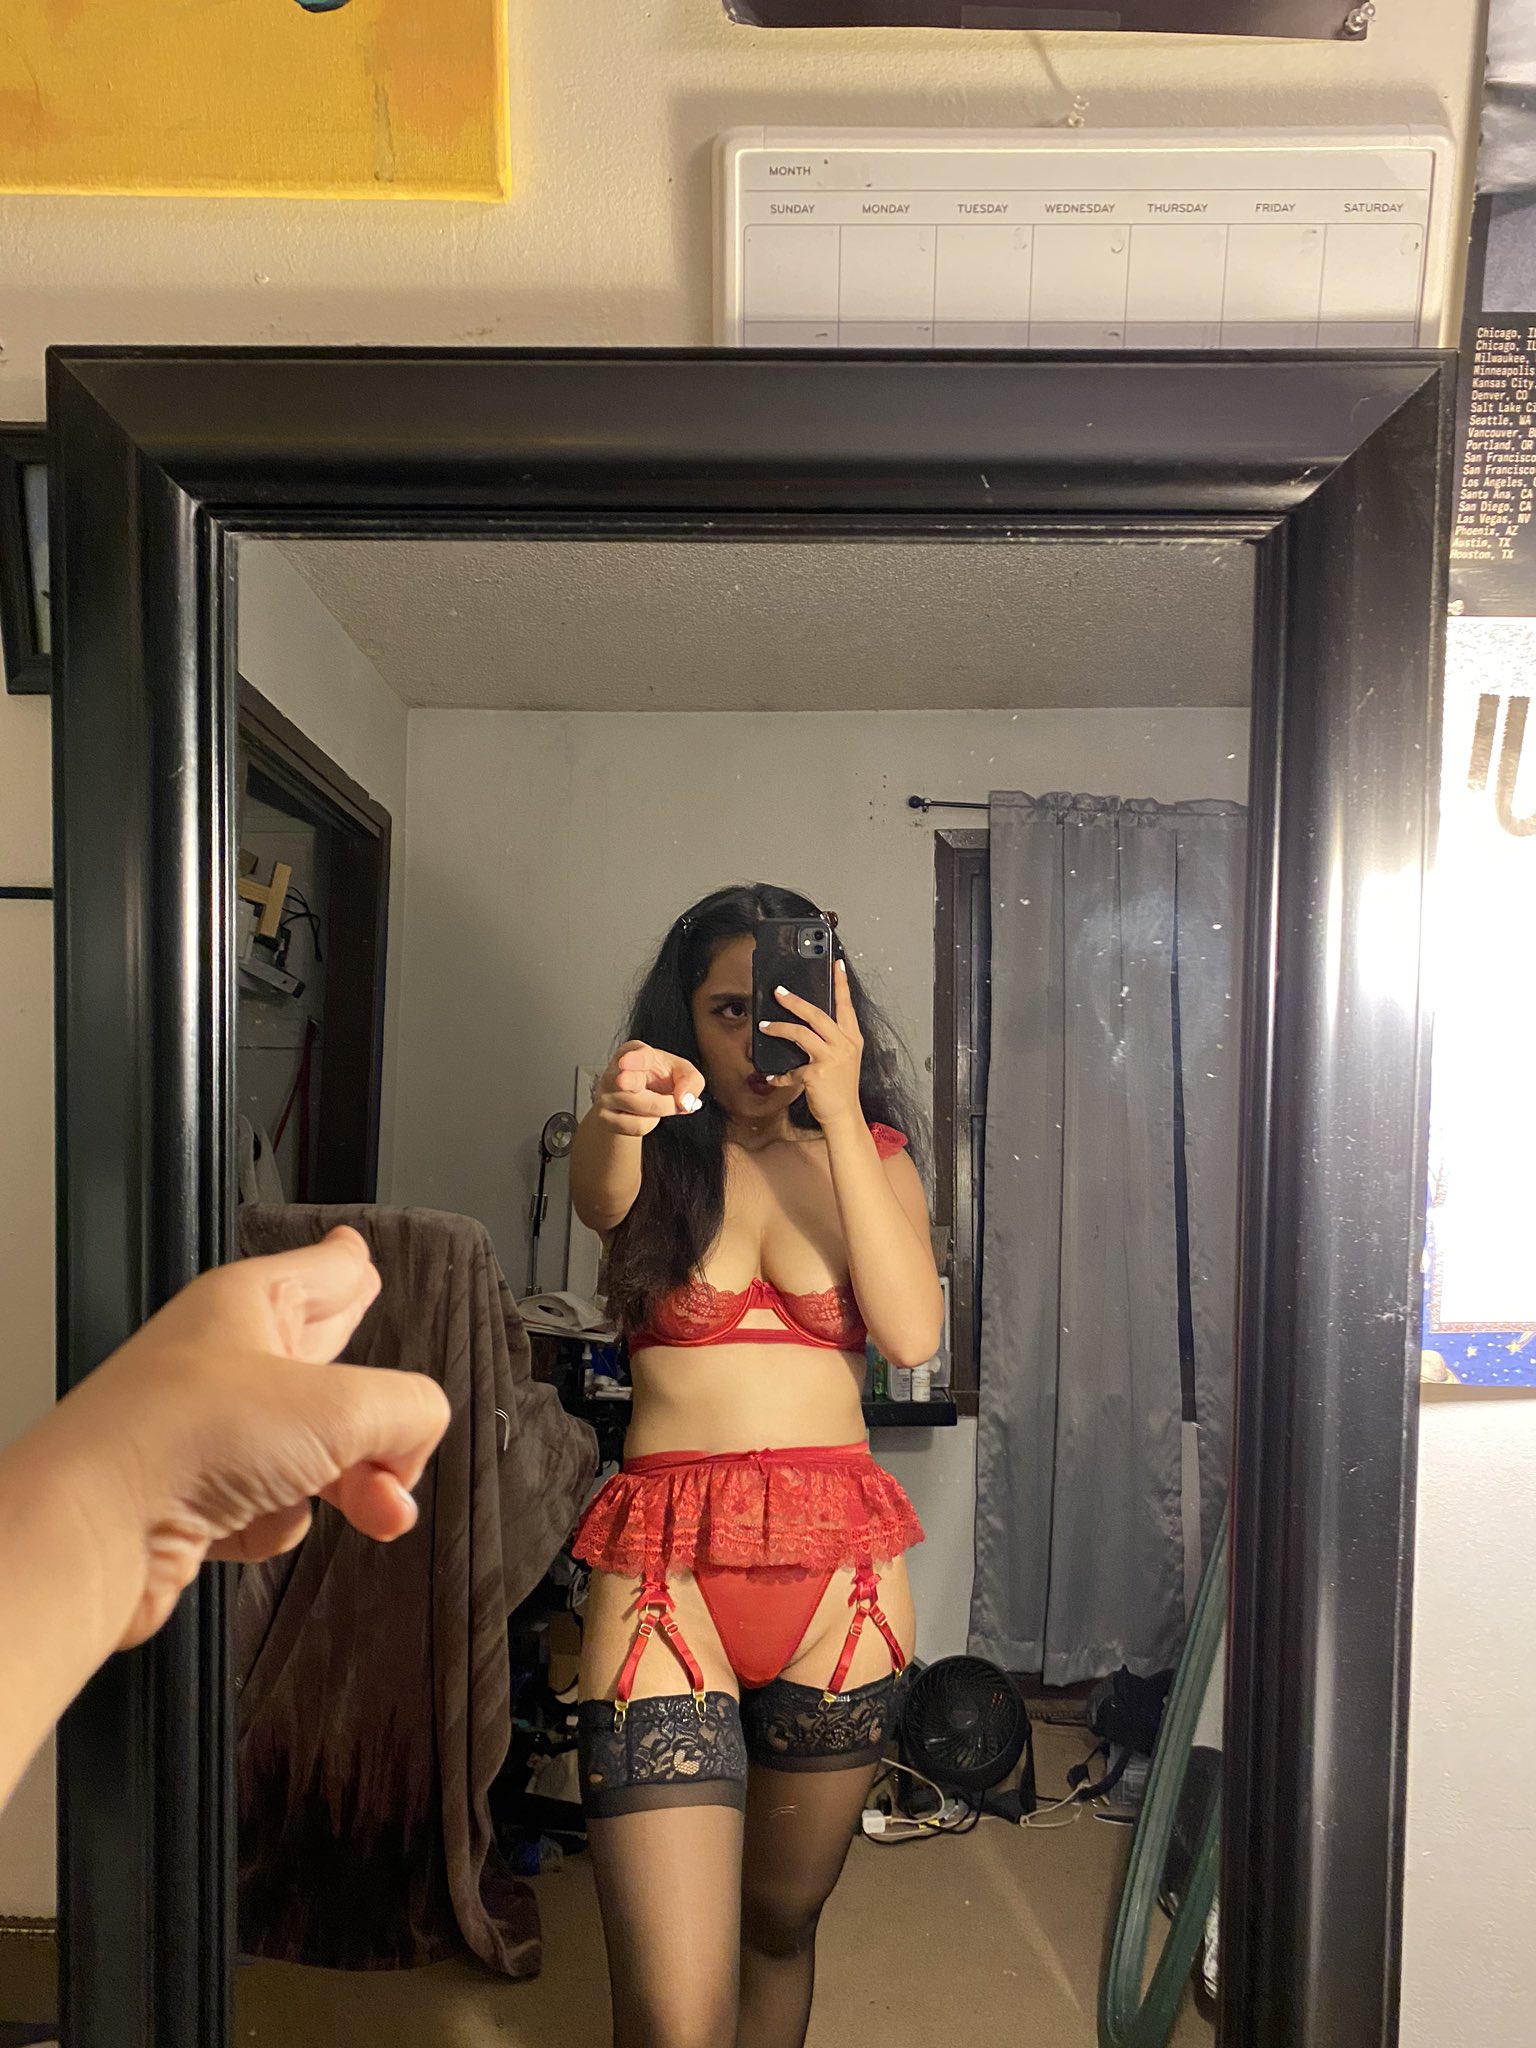 luna mills on Twitter: "🍓customs, 1 on 1, nudes, lingerie, 🍓subscribe to  my onlyfans 🍓https://t.co/a2QgOWJA9T https://t.co/exG3Ga2ZVv" / Twitter